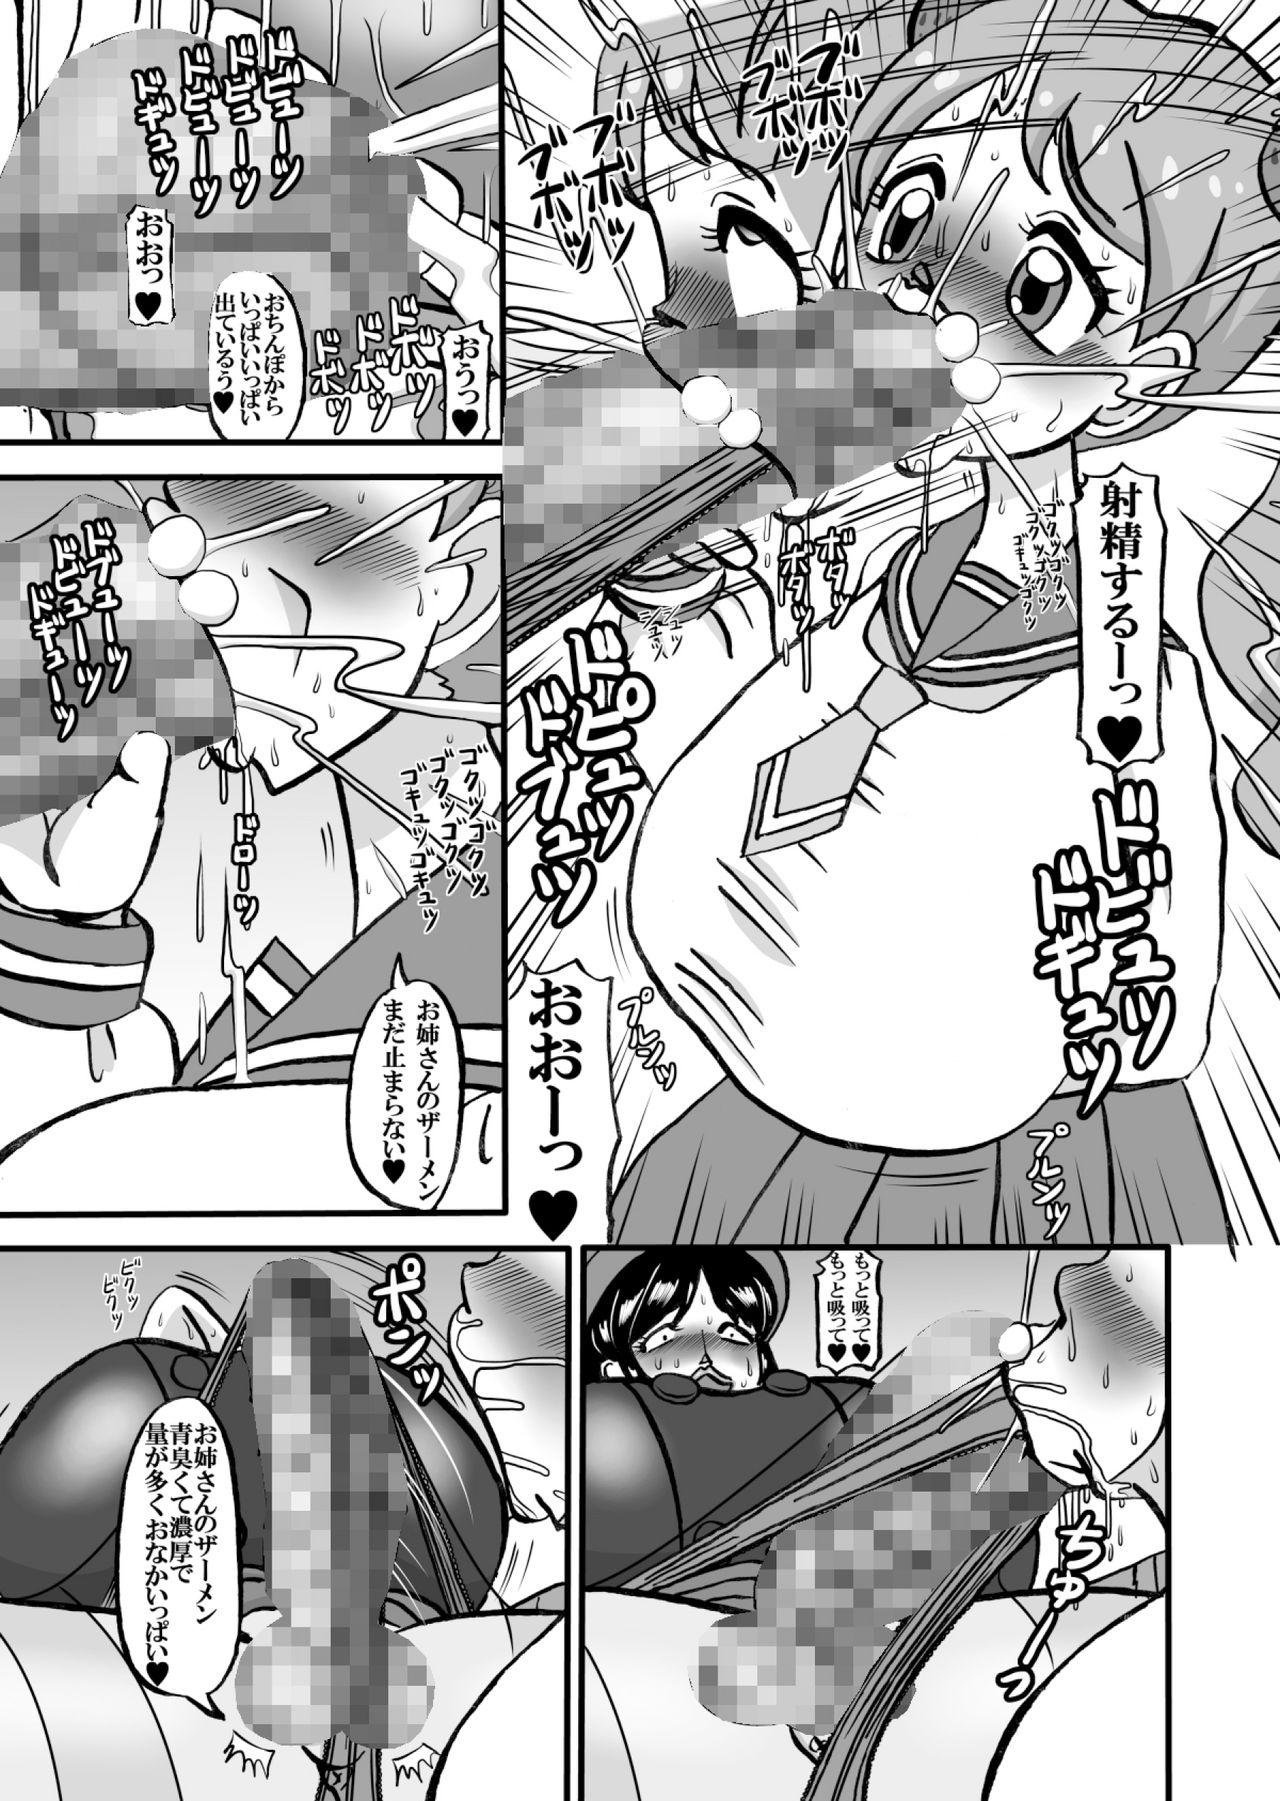 Submissive Sweetie Girls 18 - Kirakira precure a la mode Officesex - Page 7